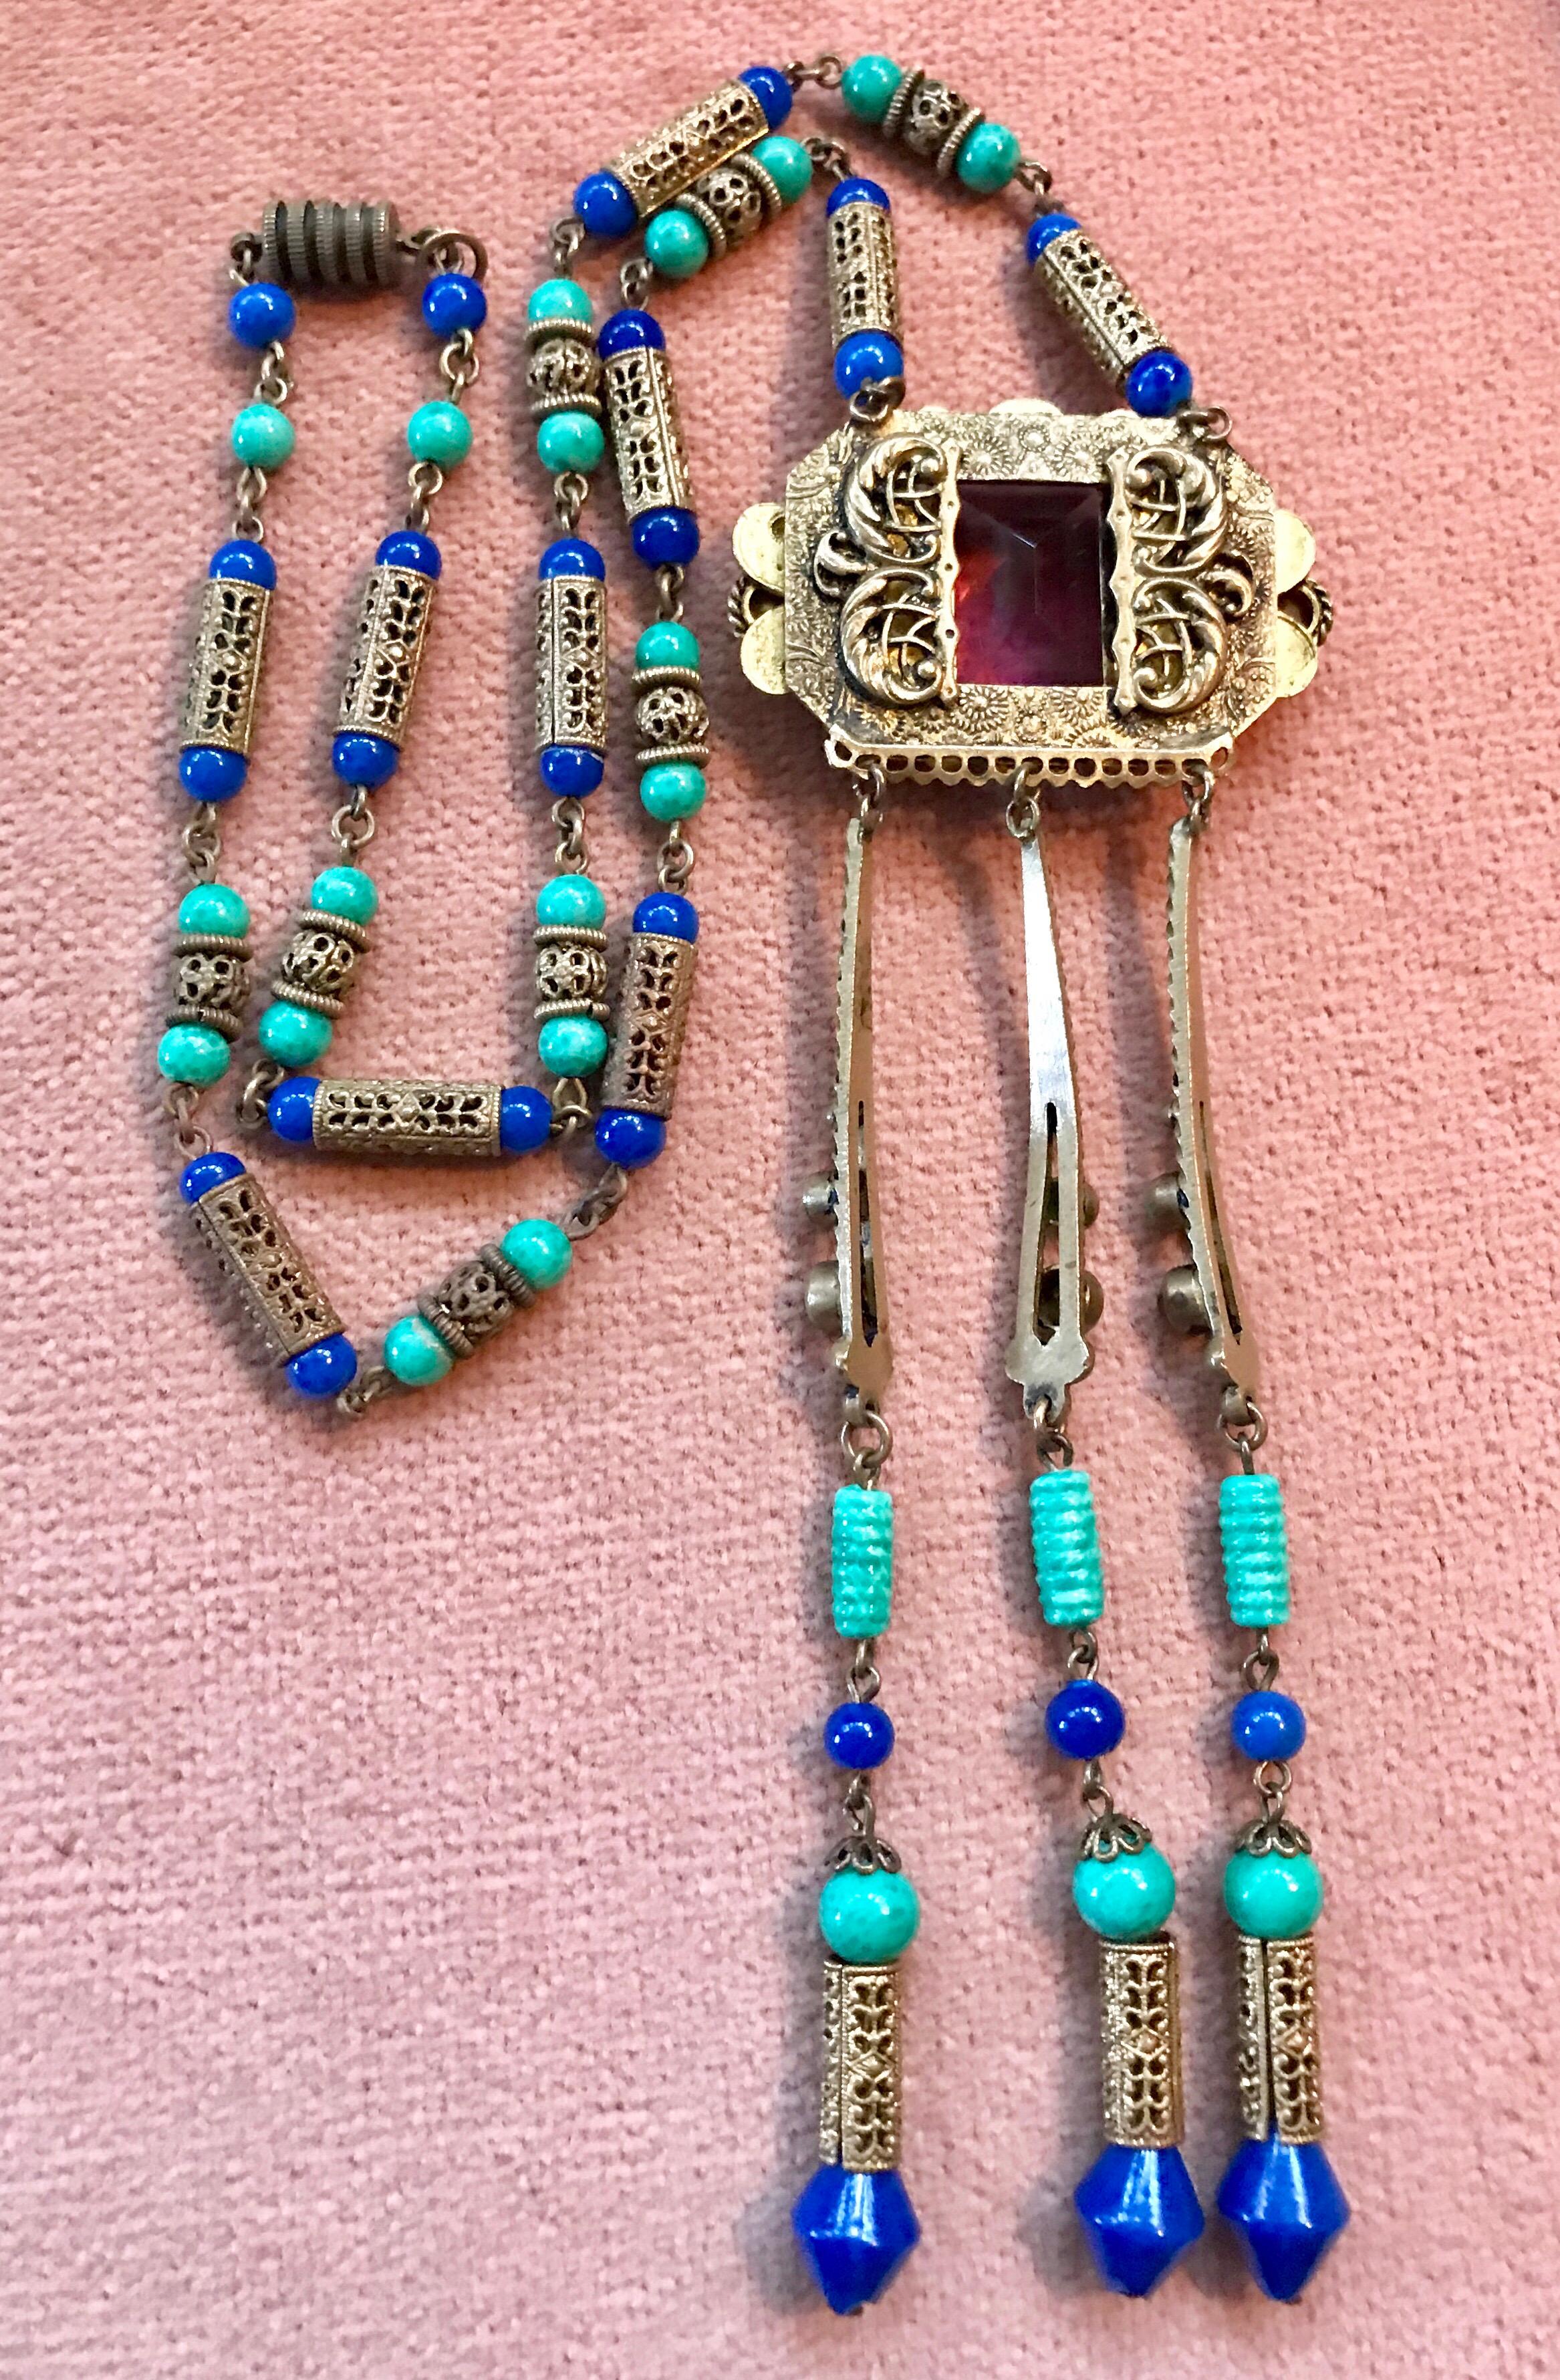 Circa 1920s Czech Egyptian Revival Pendant Necklace In Good Condition For Sale In Long Beach, CA